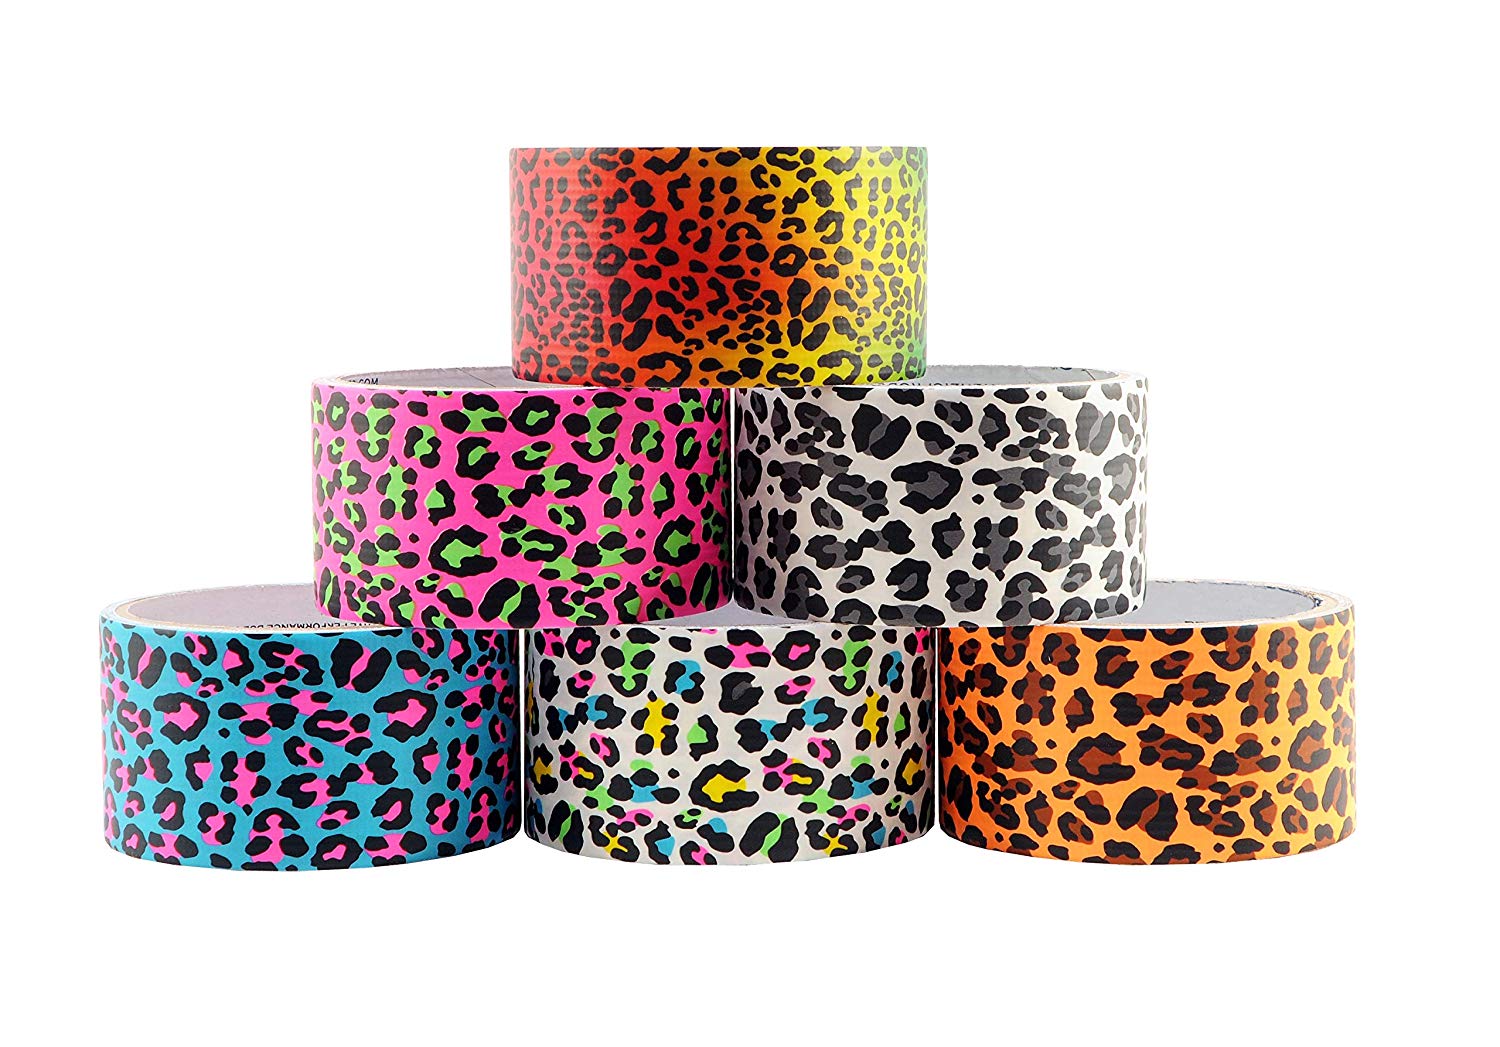 6 Rolls Bazic Leopard Themed Decorative Duct Tapes Set (1.88 X 5’)  Multi-purpose Self-adhering Tapes Assorted Colors - 6 Packs